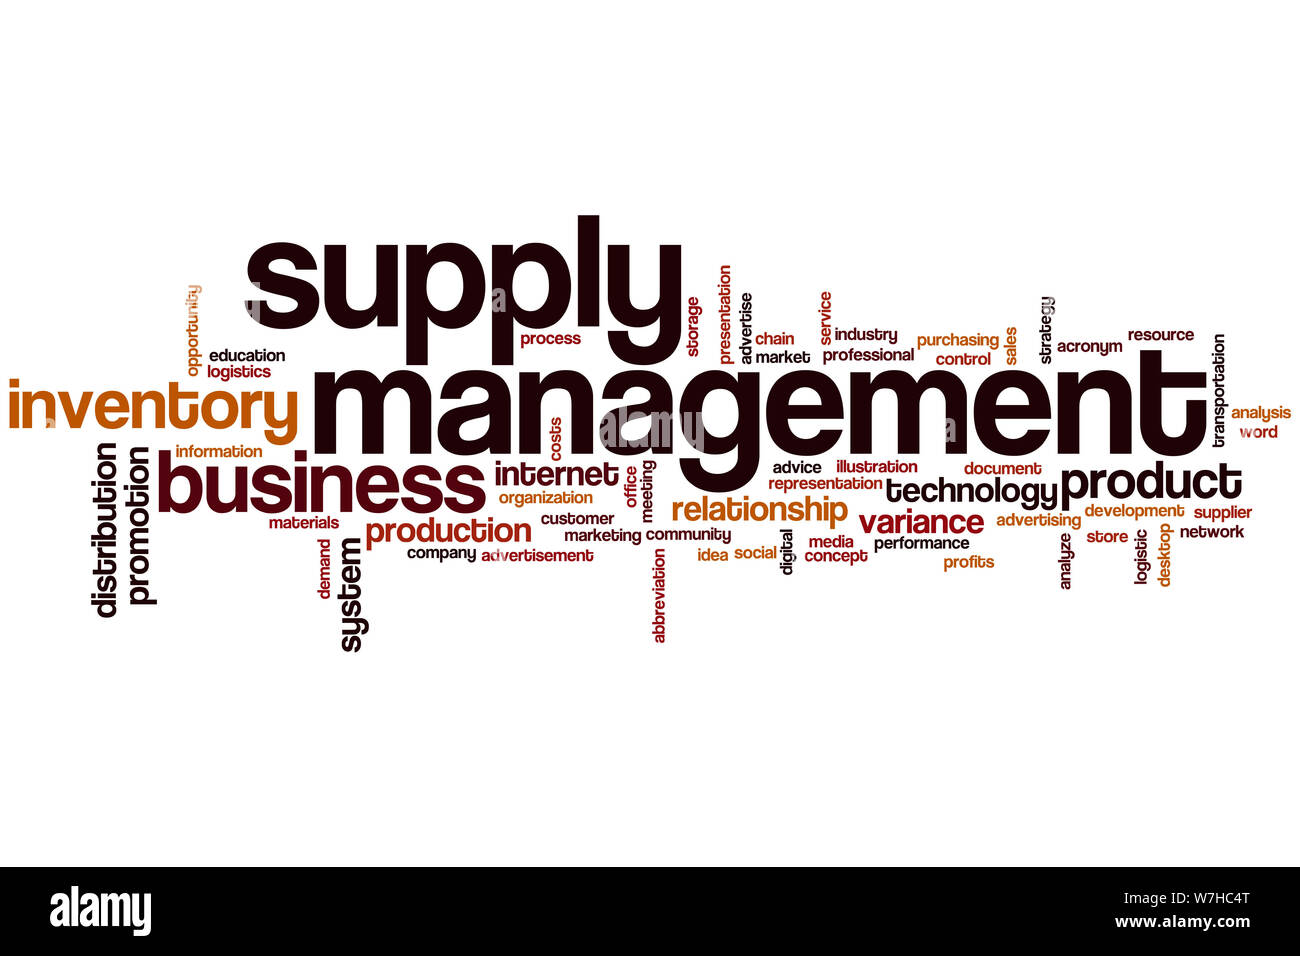 Supply management word cloud concept Stock Photo